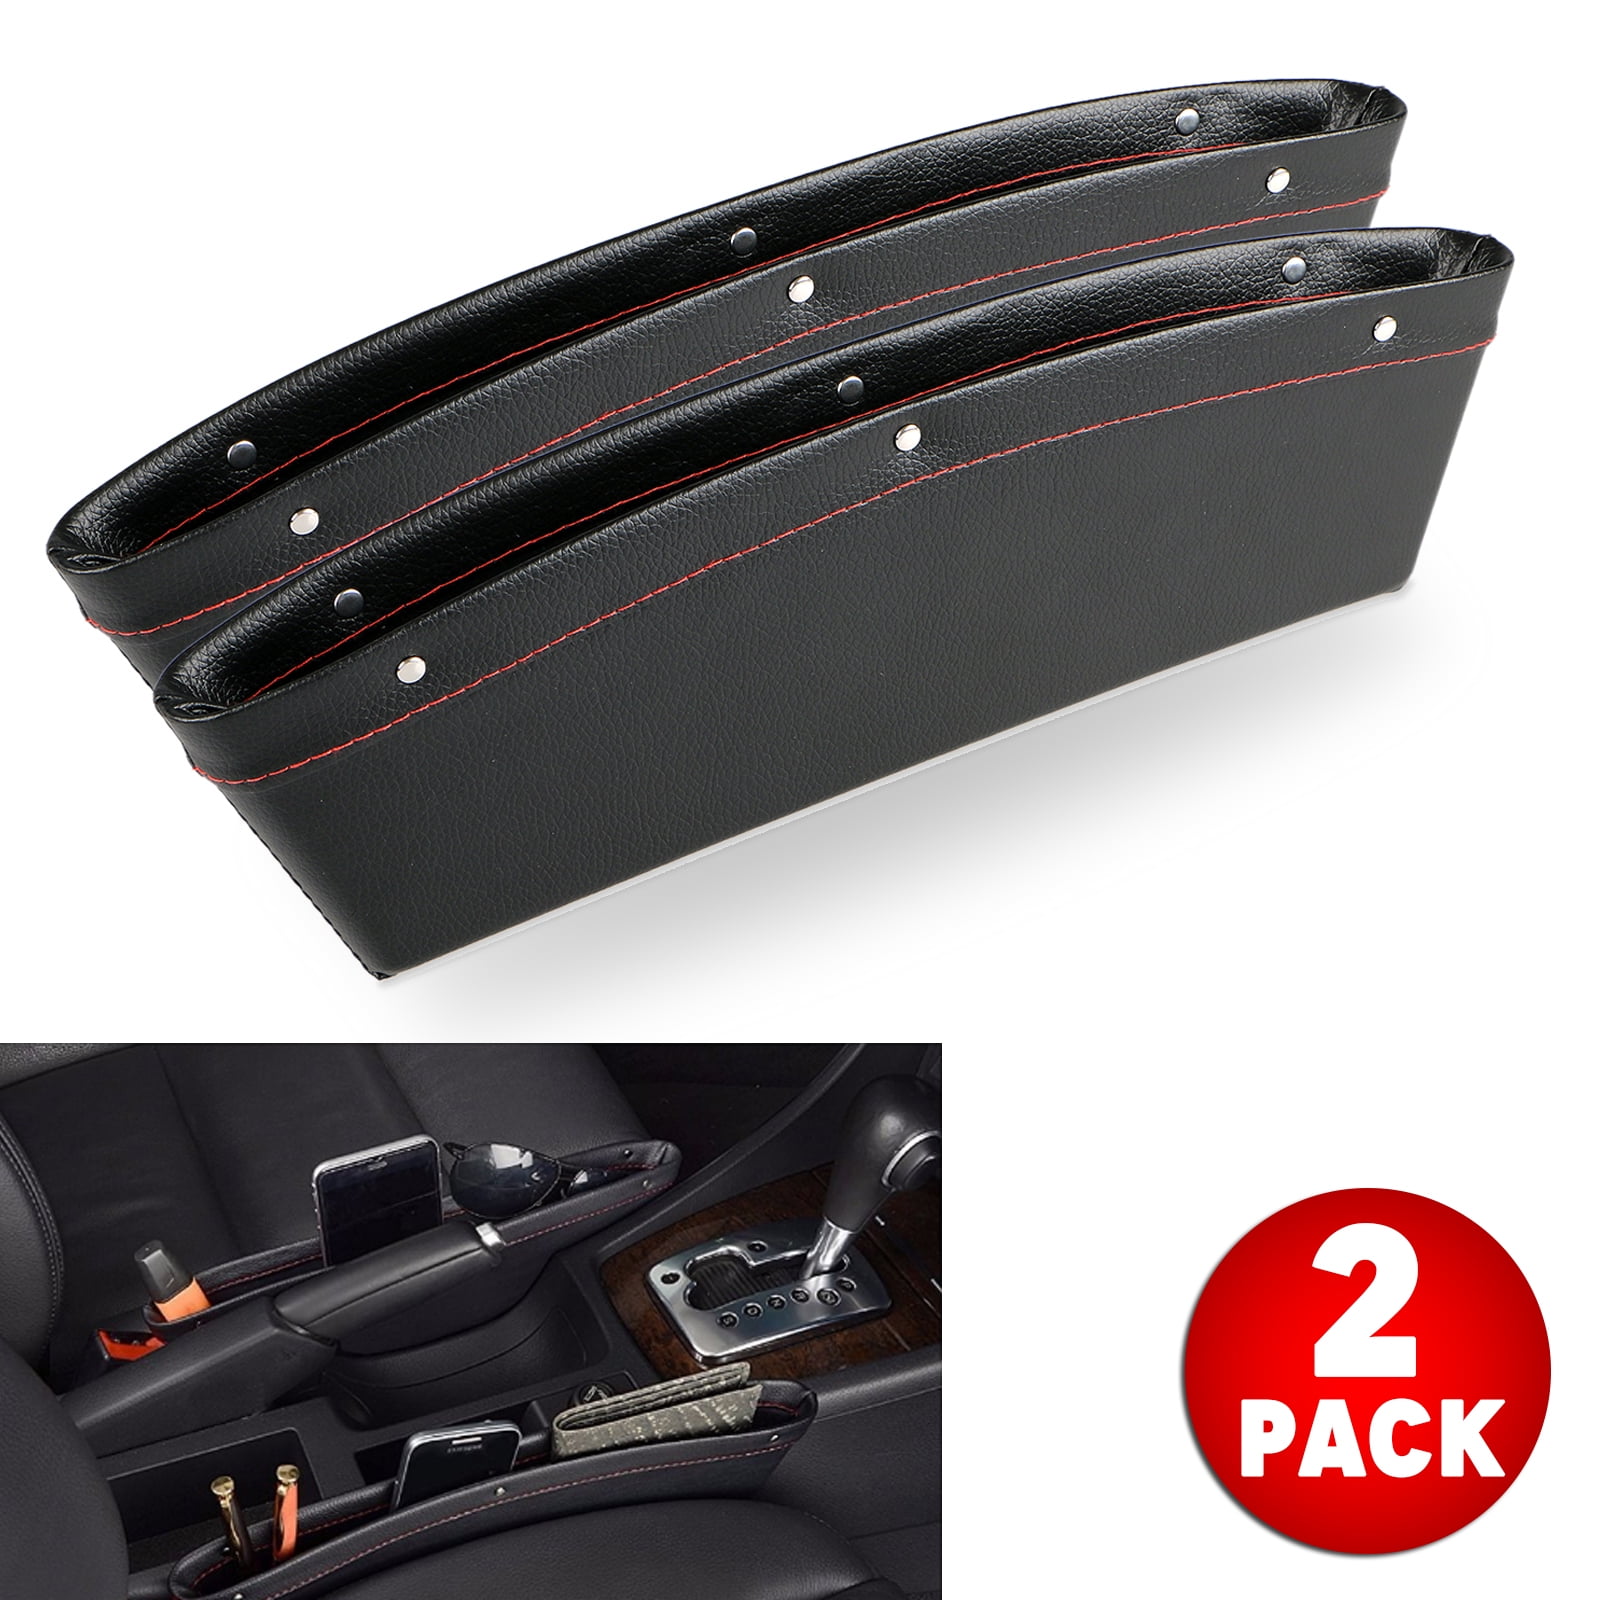 NovelBee 2 Pack of PU Leather Car Seat Gap Filler,Console Organizer,Pocket,Seat Catcher,Seat Crevice Storage Box 